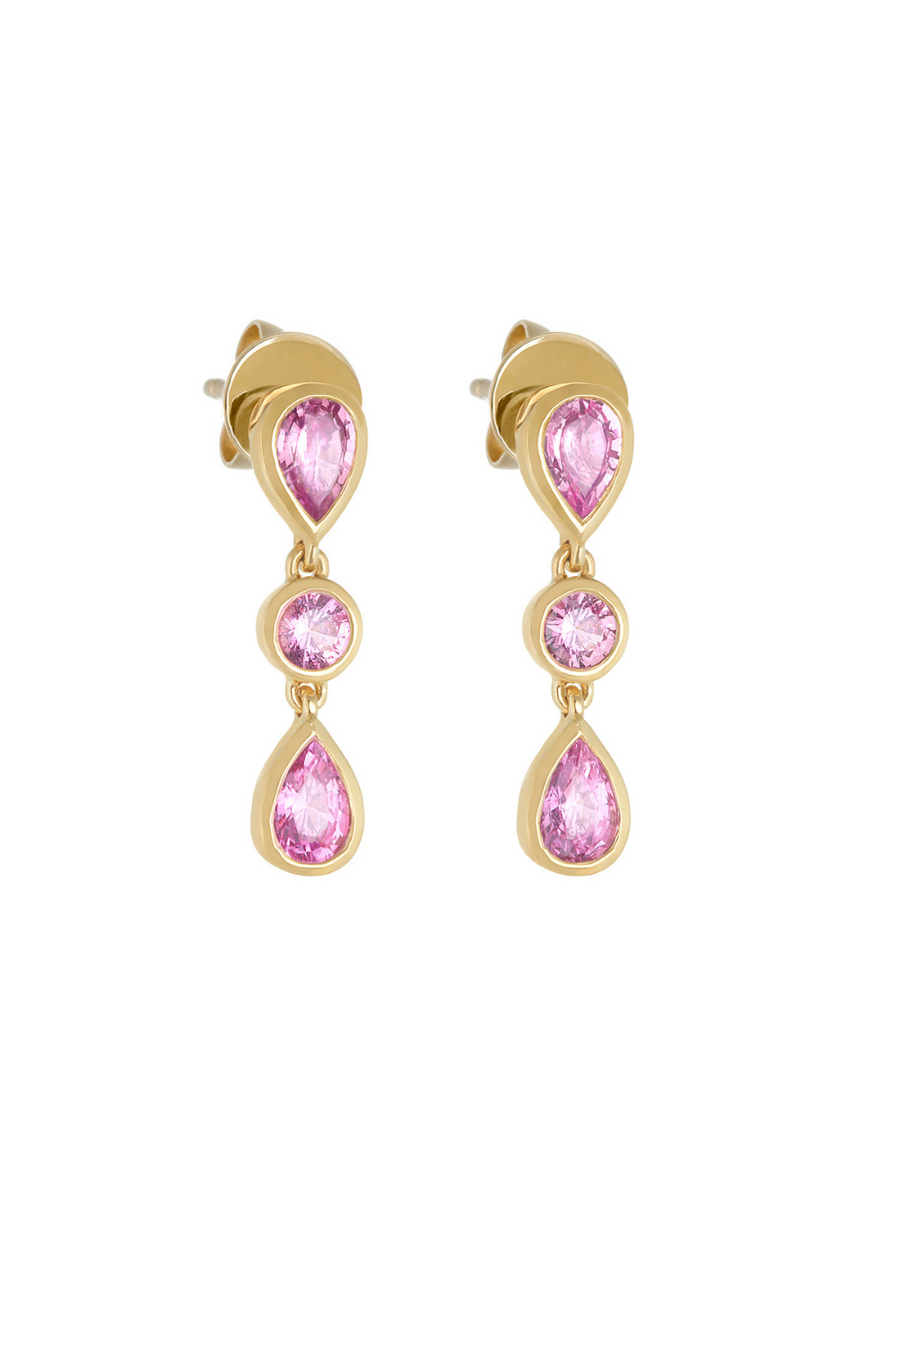 Pink Sapphire Classic 'Raindrop' Earrings in 18k Gold